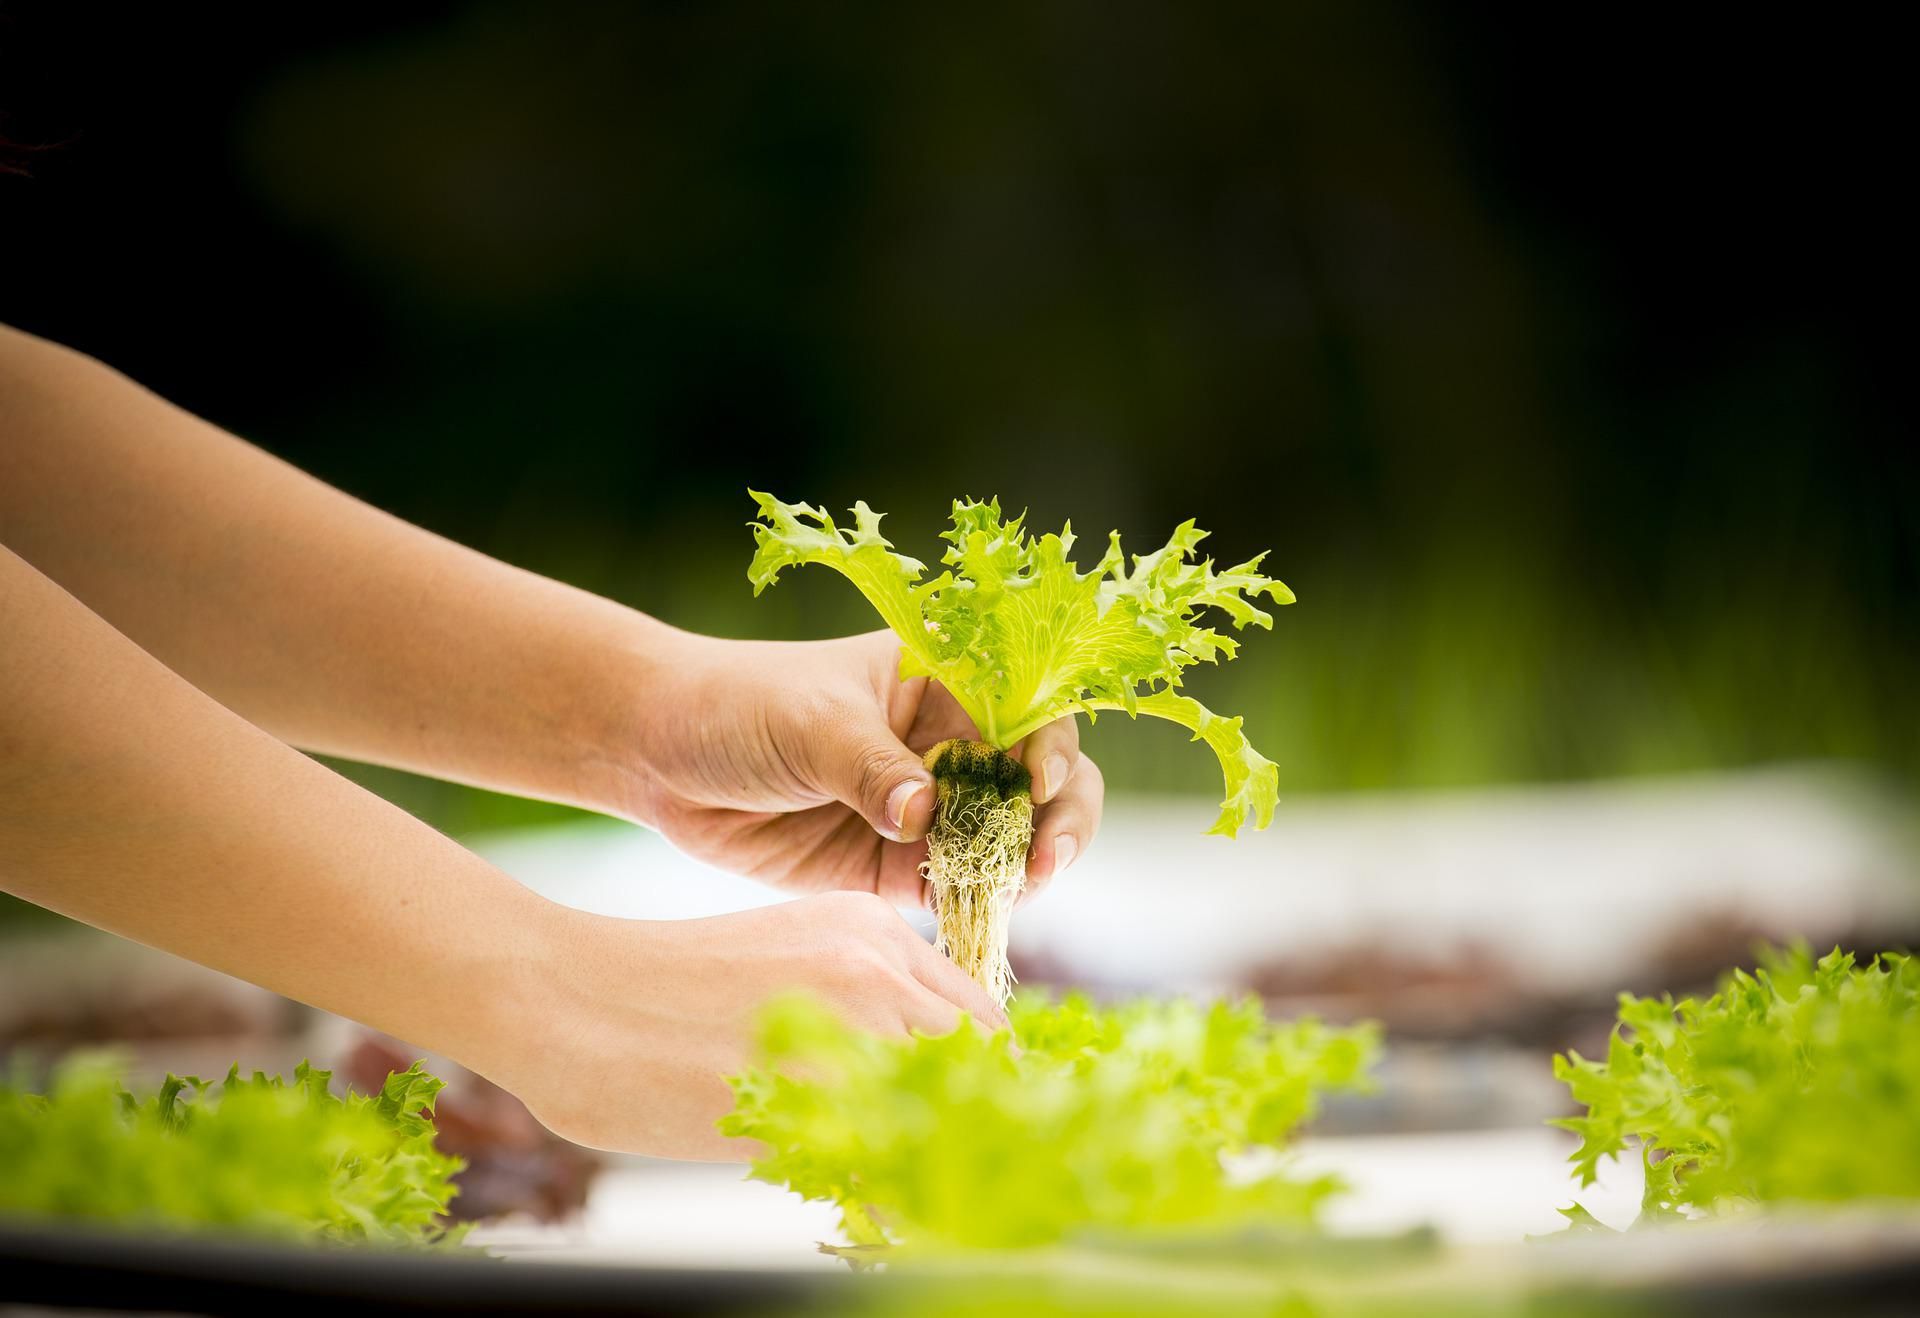 Advantages to hydroponic gardening